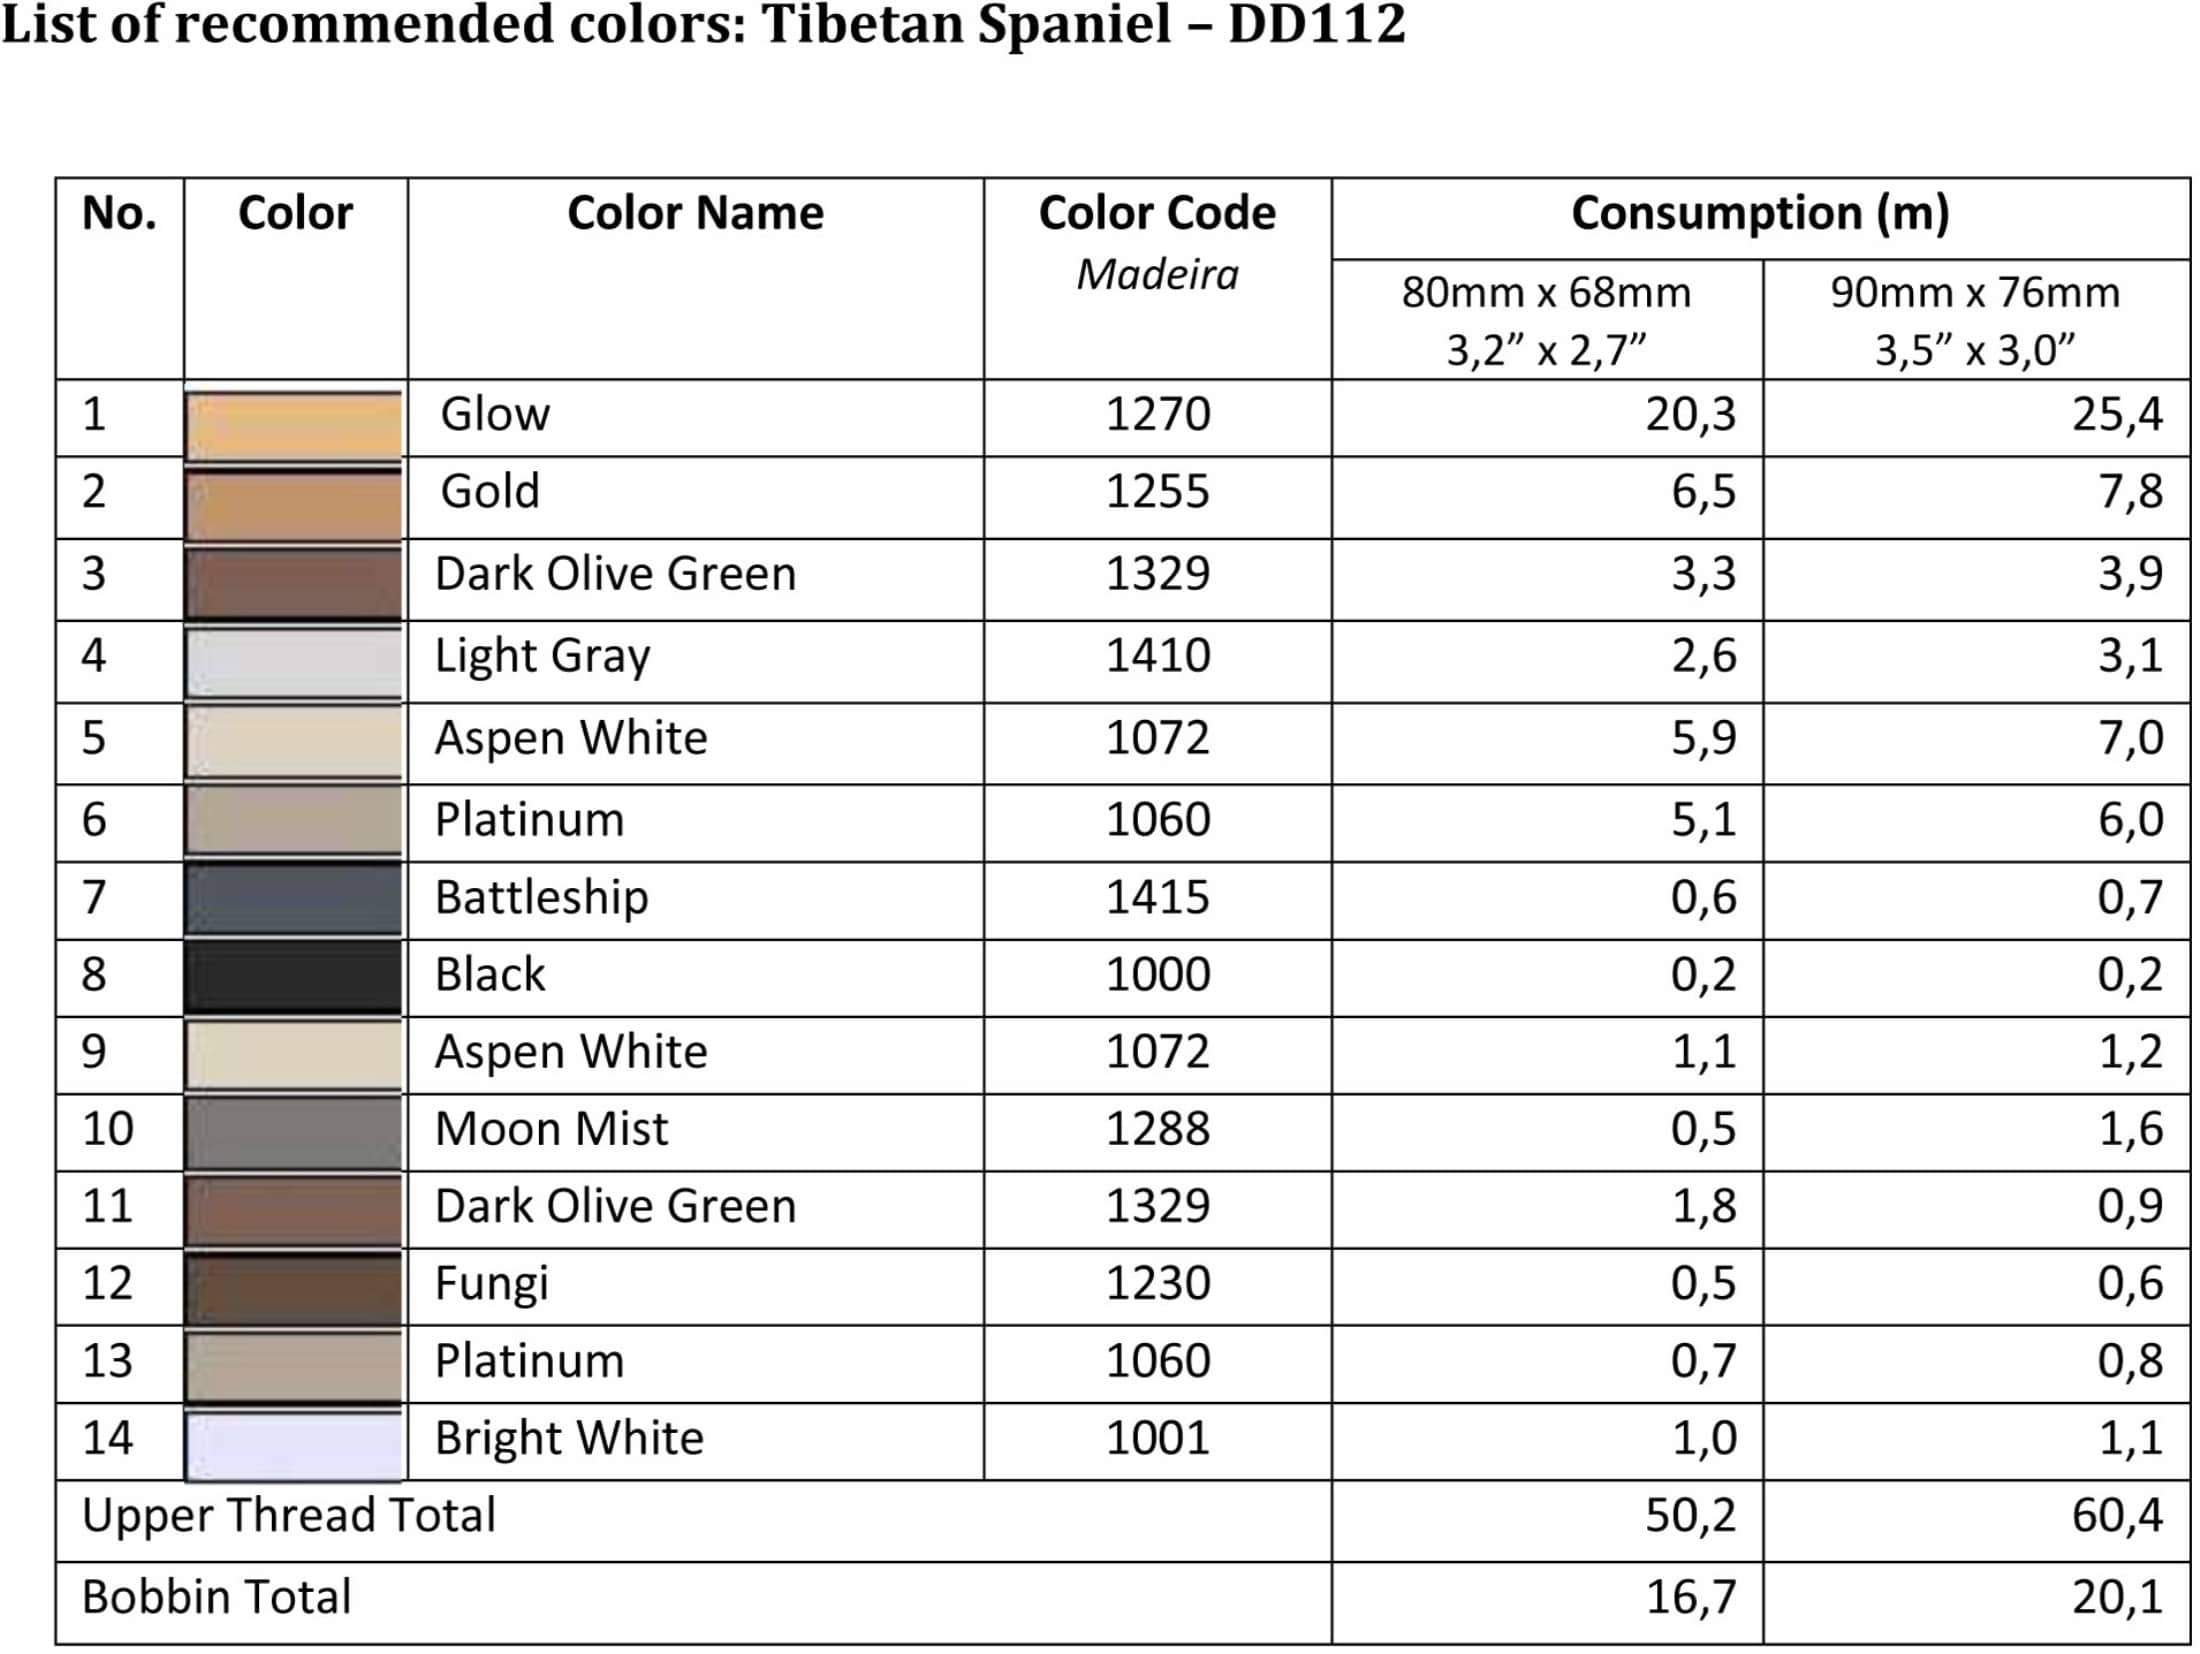 List of Recommended Colors - Tibetan Spaniel DD112